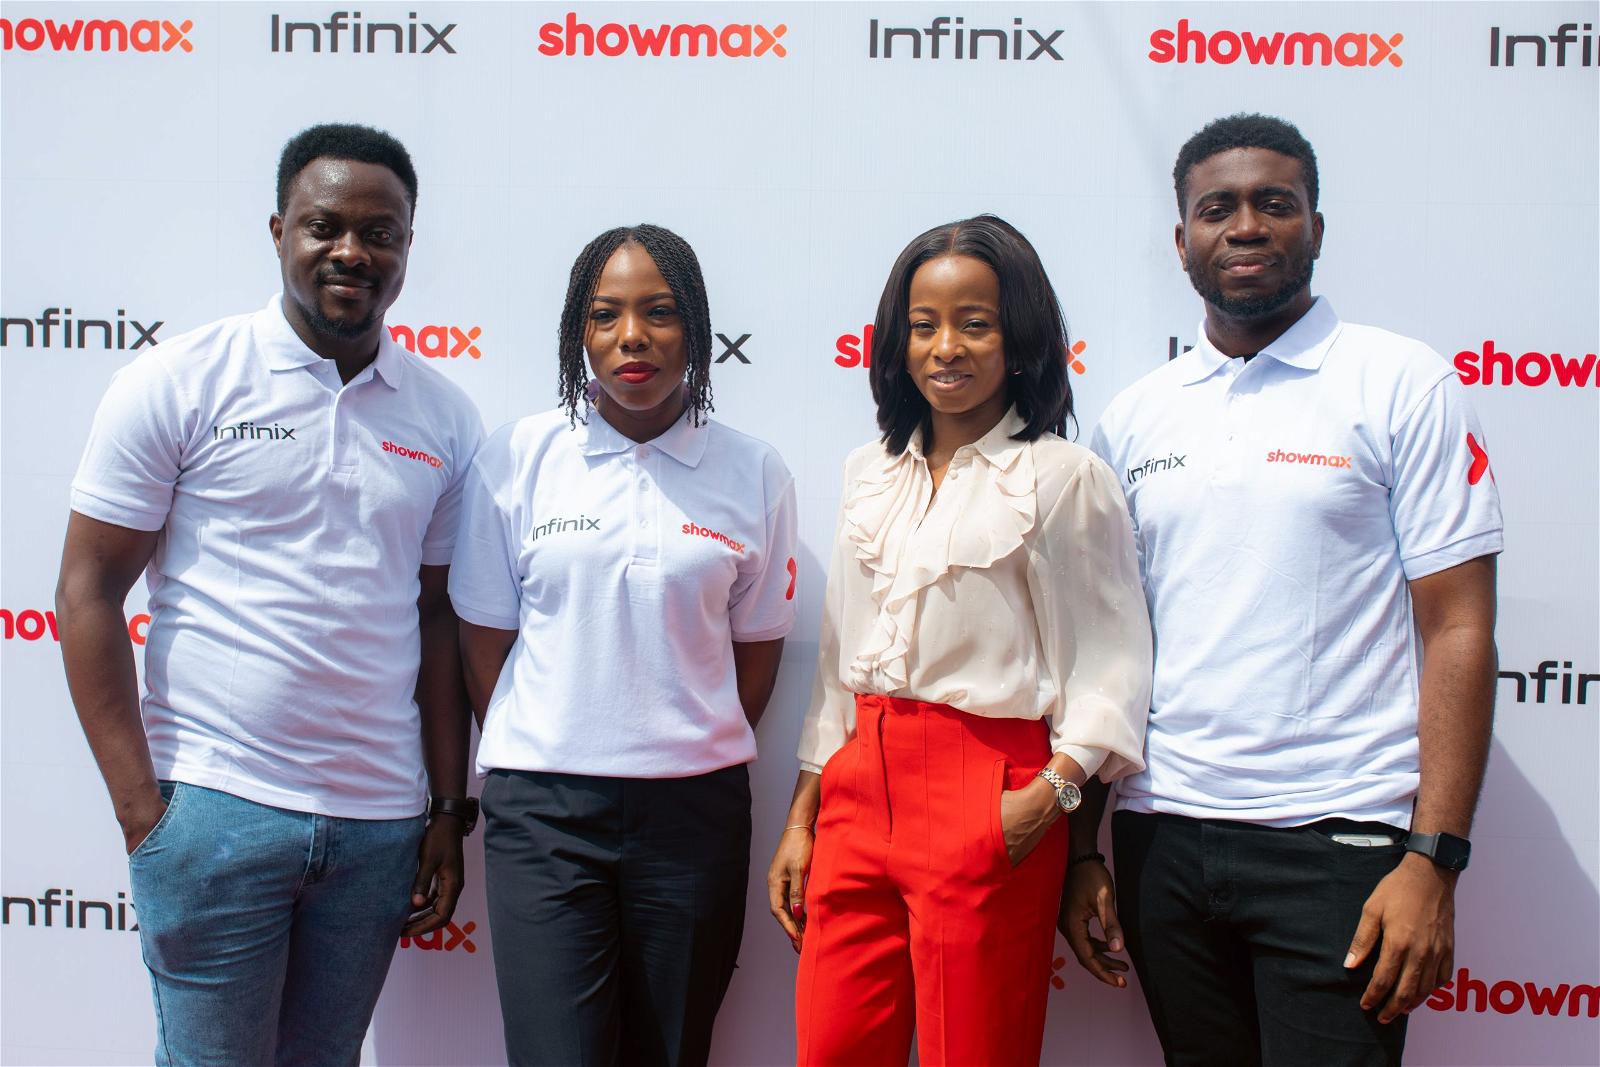 Get-The-Best-Of-Mobile-Entertainment-With-Infinix-And-Showmax-Partnership-scaled.jpg